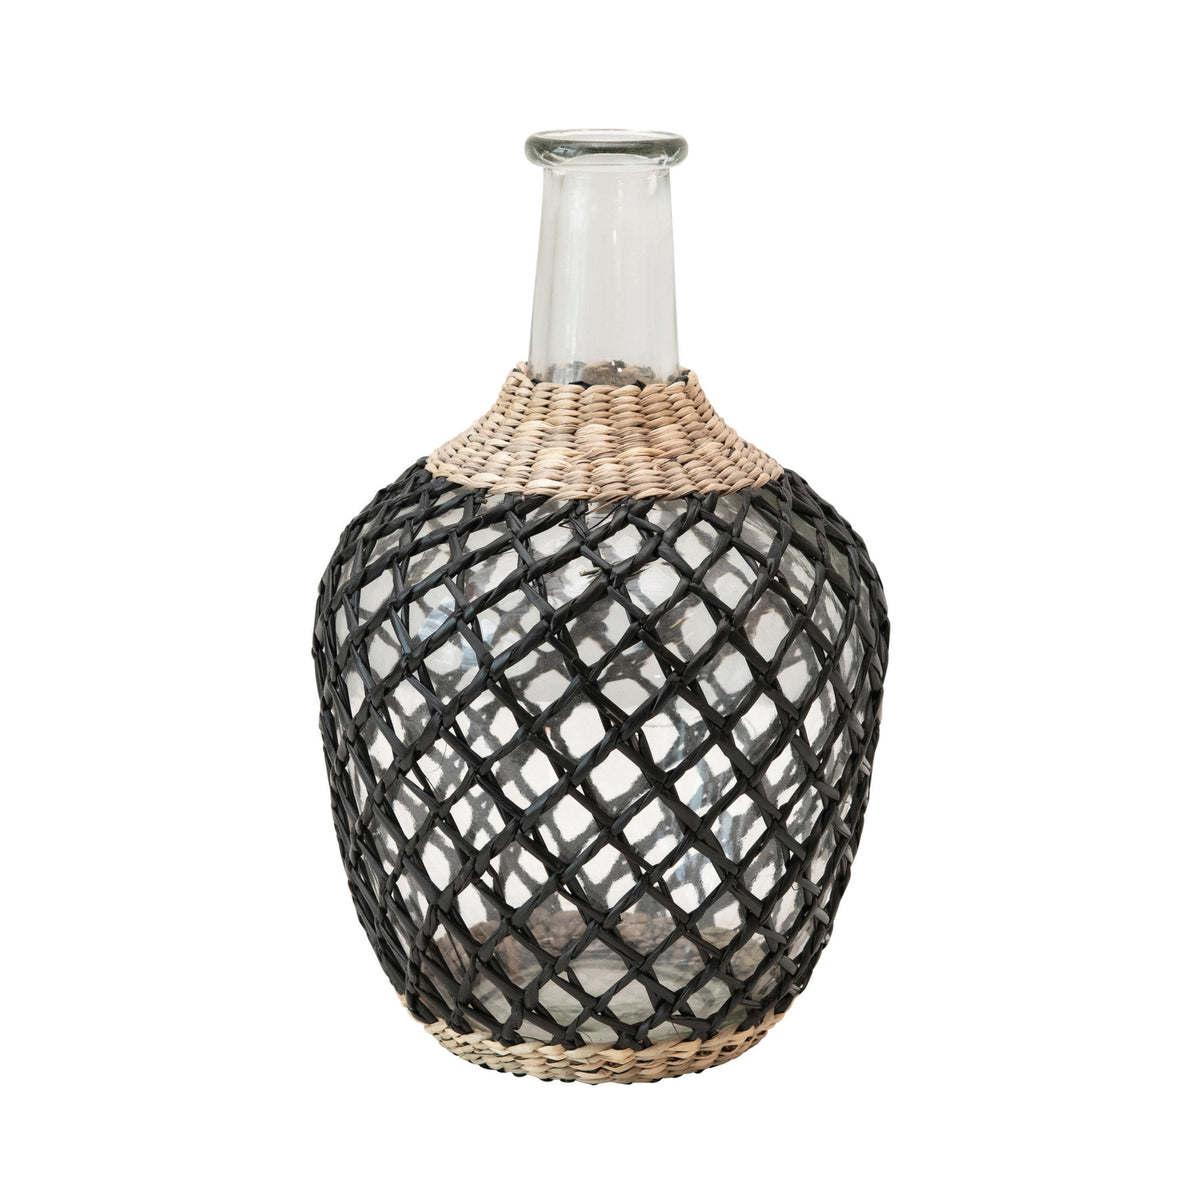 Glass Decanter with Seagrass Weave